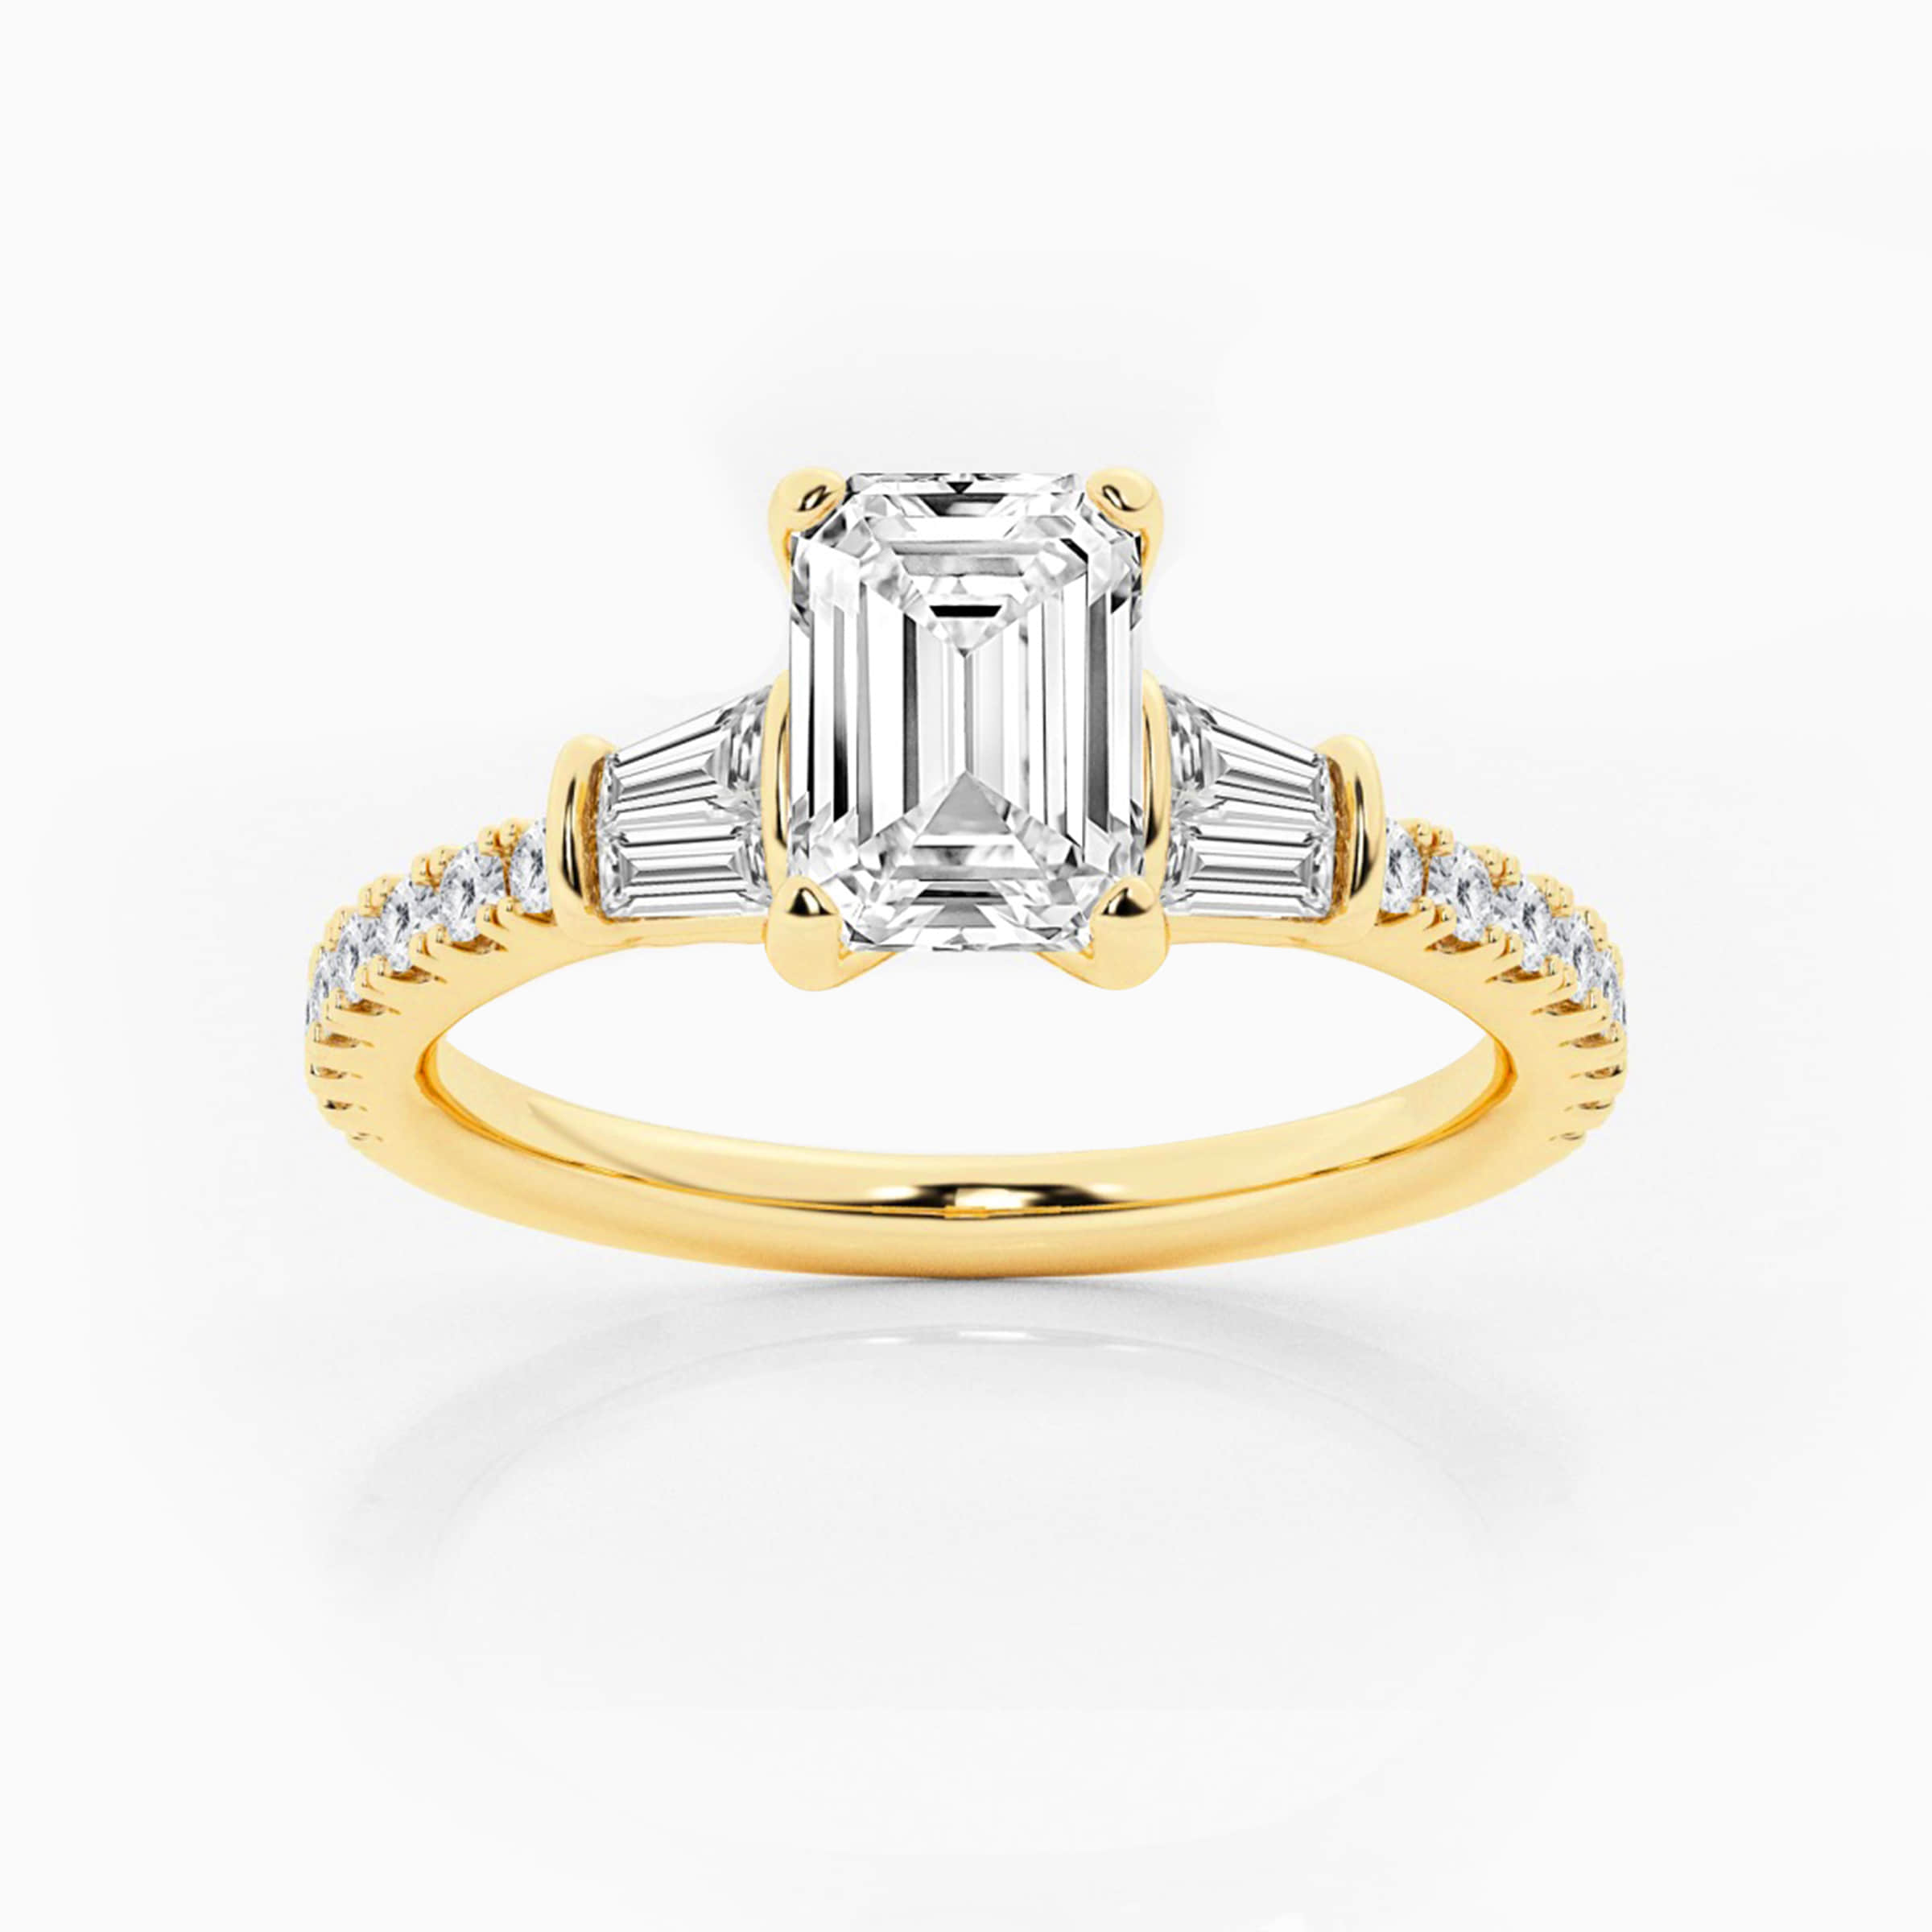 Darry Ring emerald cut three stone engagement ring yellow gold